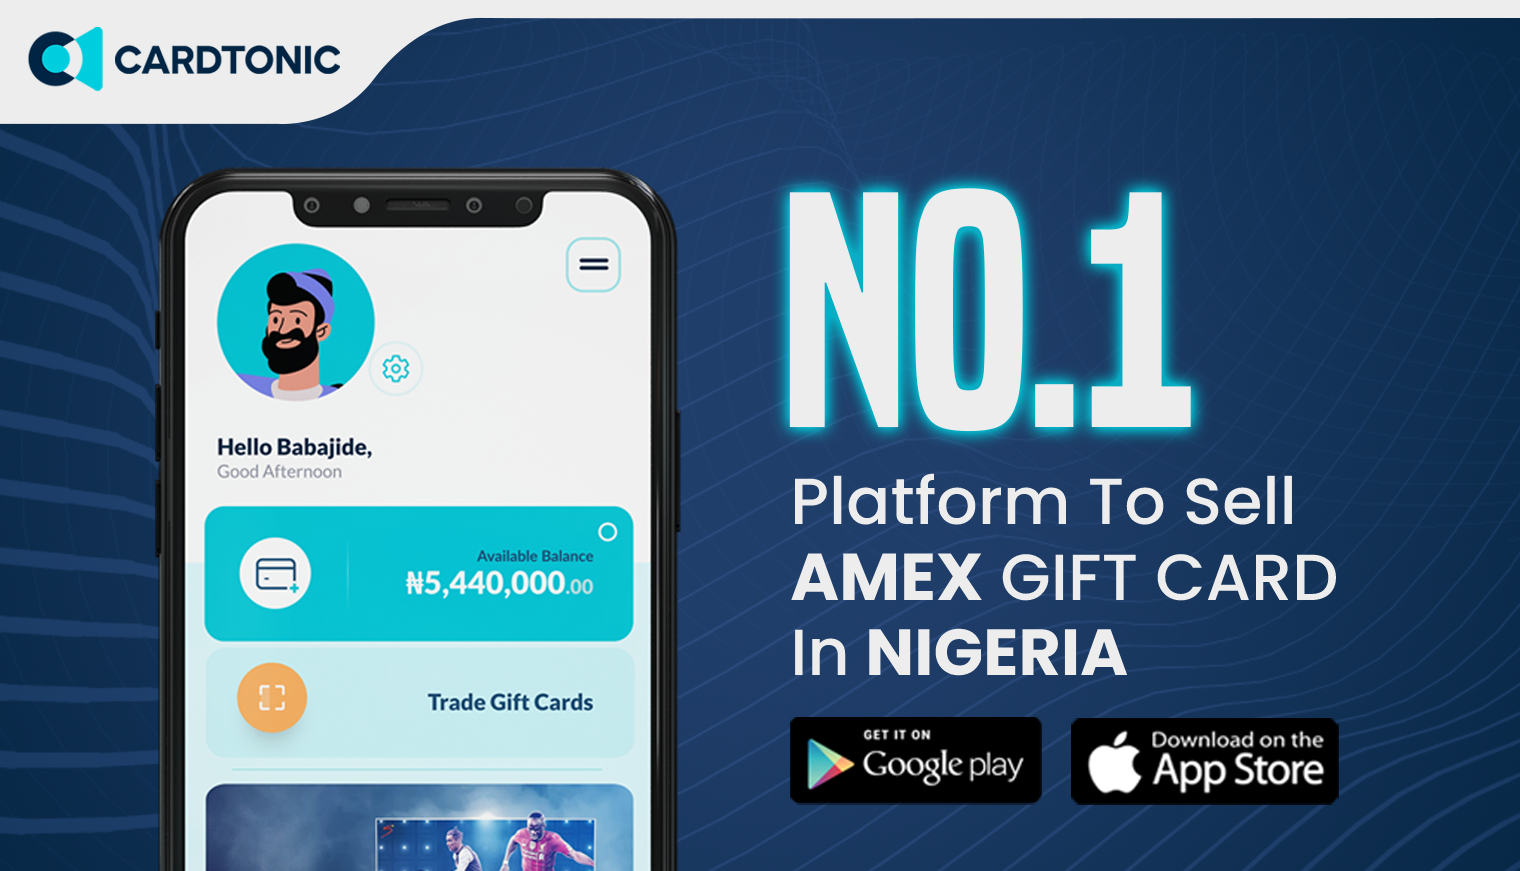 SELL AMEX GIFT CARD IN NIGERIA